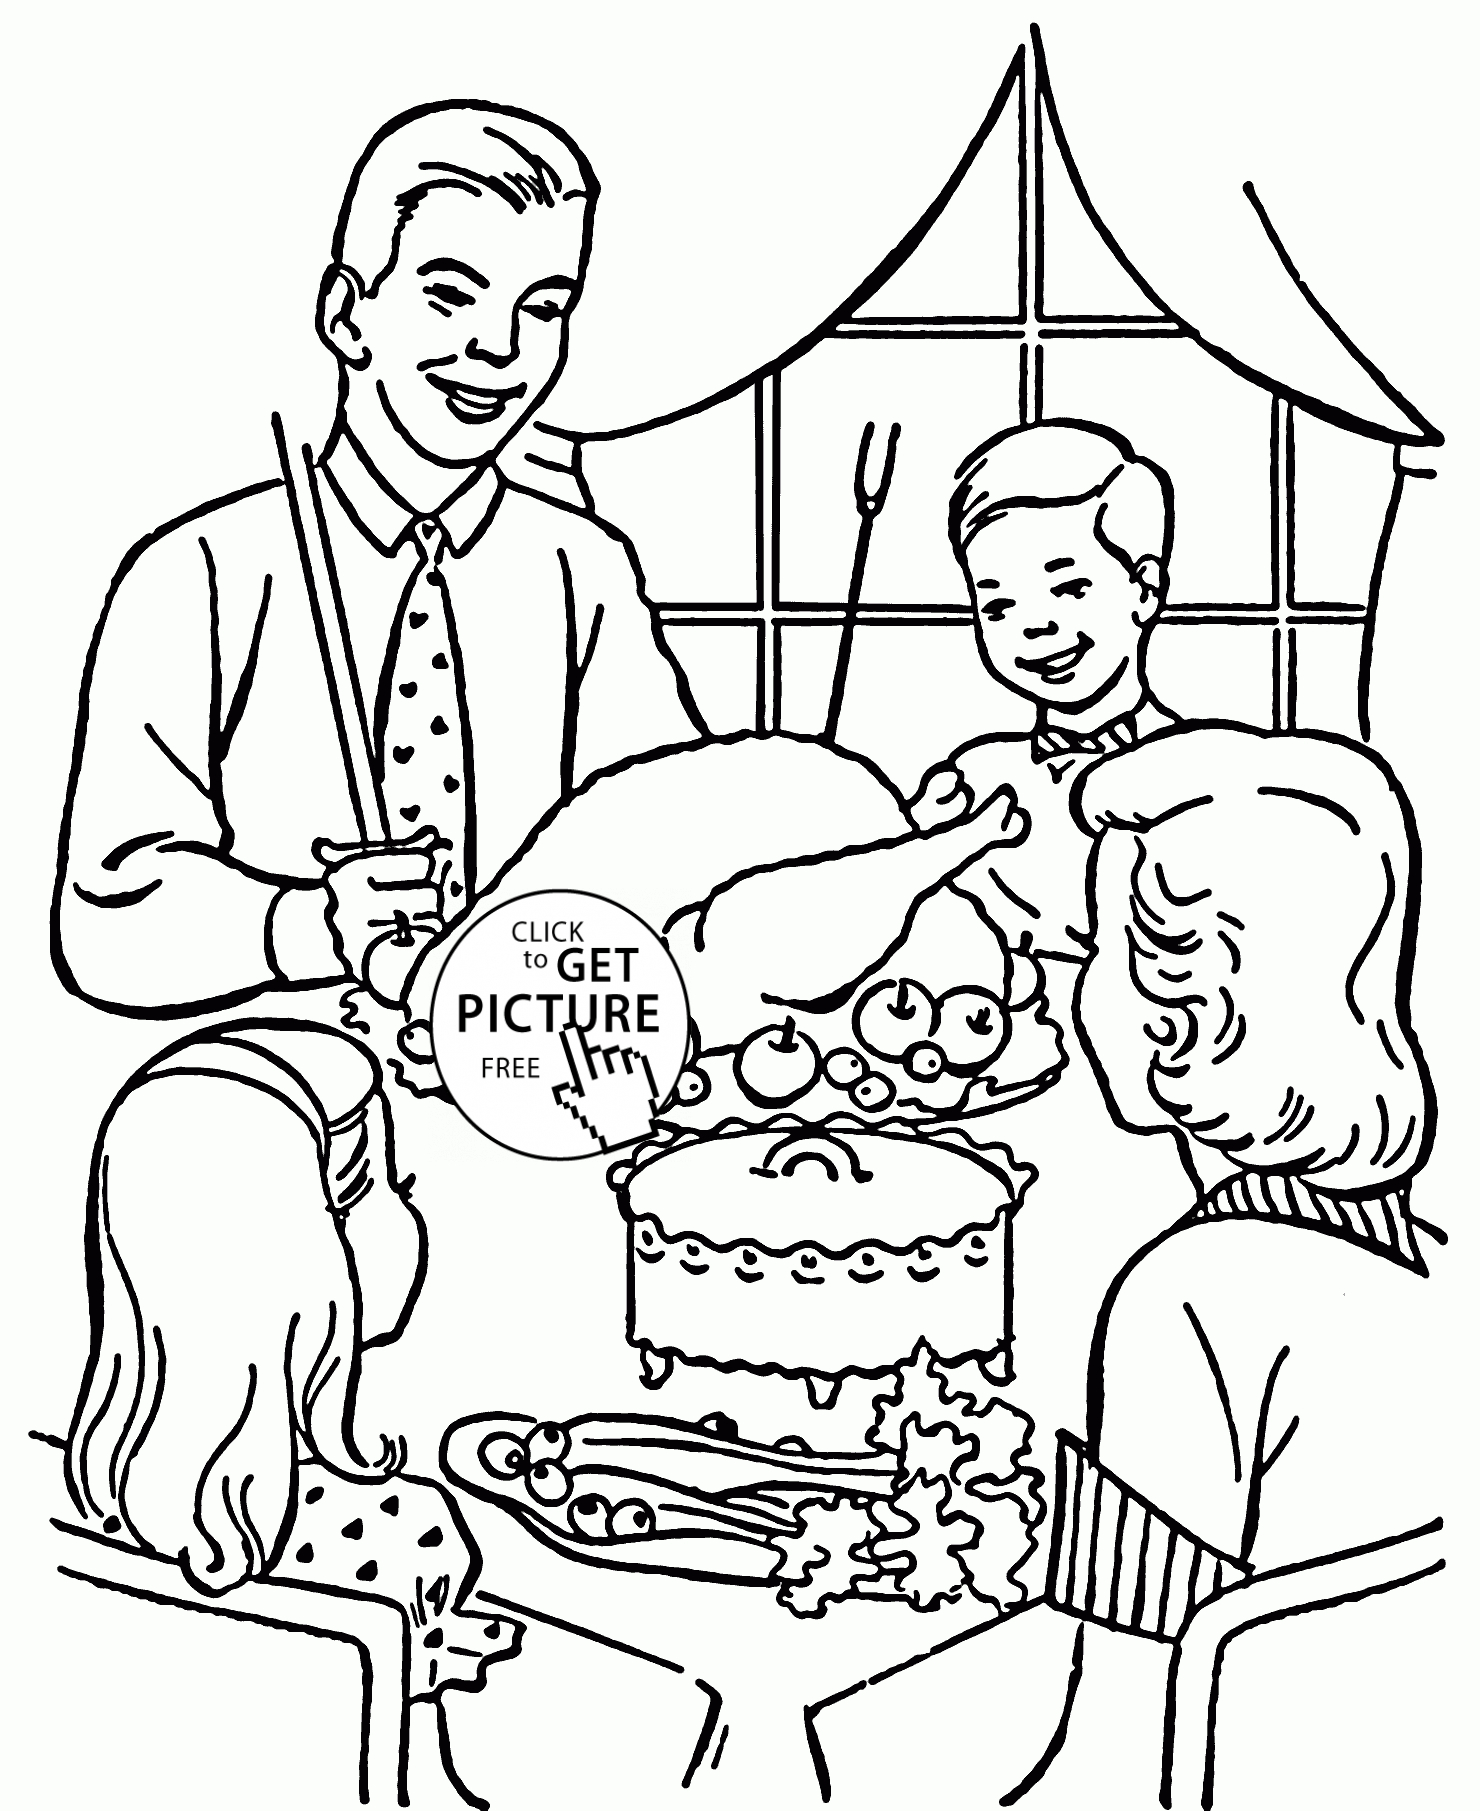 Thanksgiving Day Coloring Pages Free Thanksgiving Day Coloring Pages For Kids Holiday Printables Free